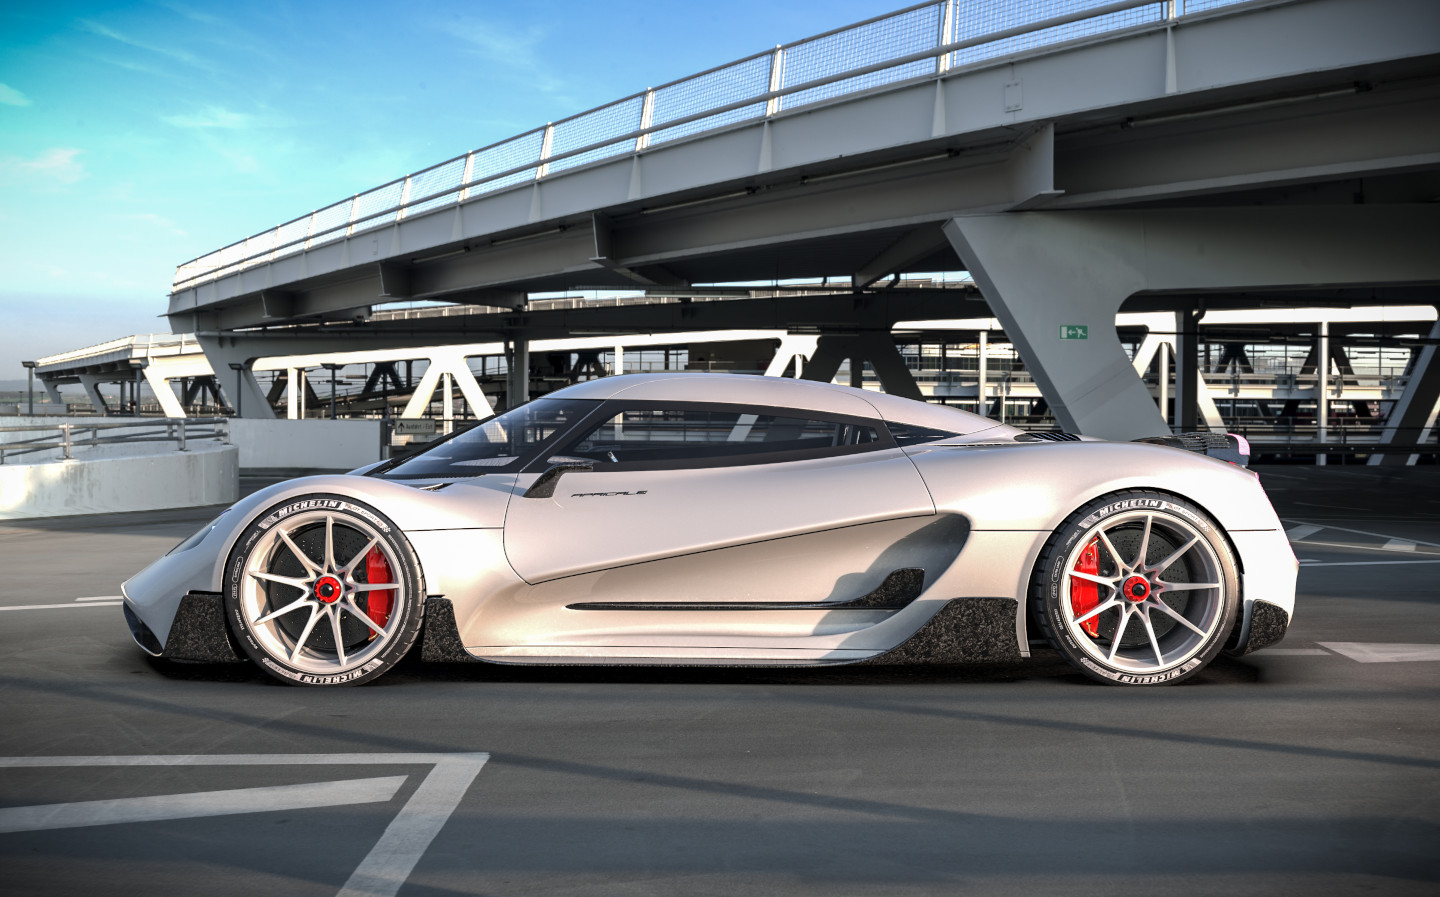 Hydrogen hypercar with 1,100bhp to be made in Warwickshire